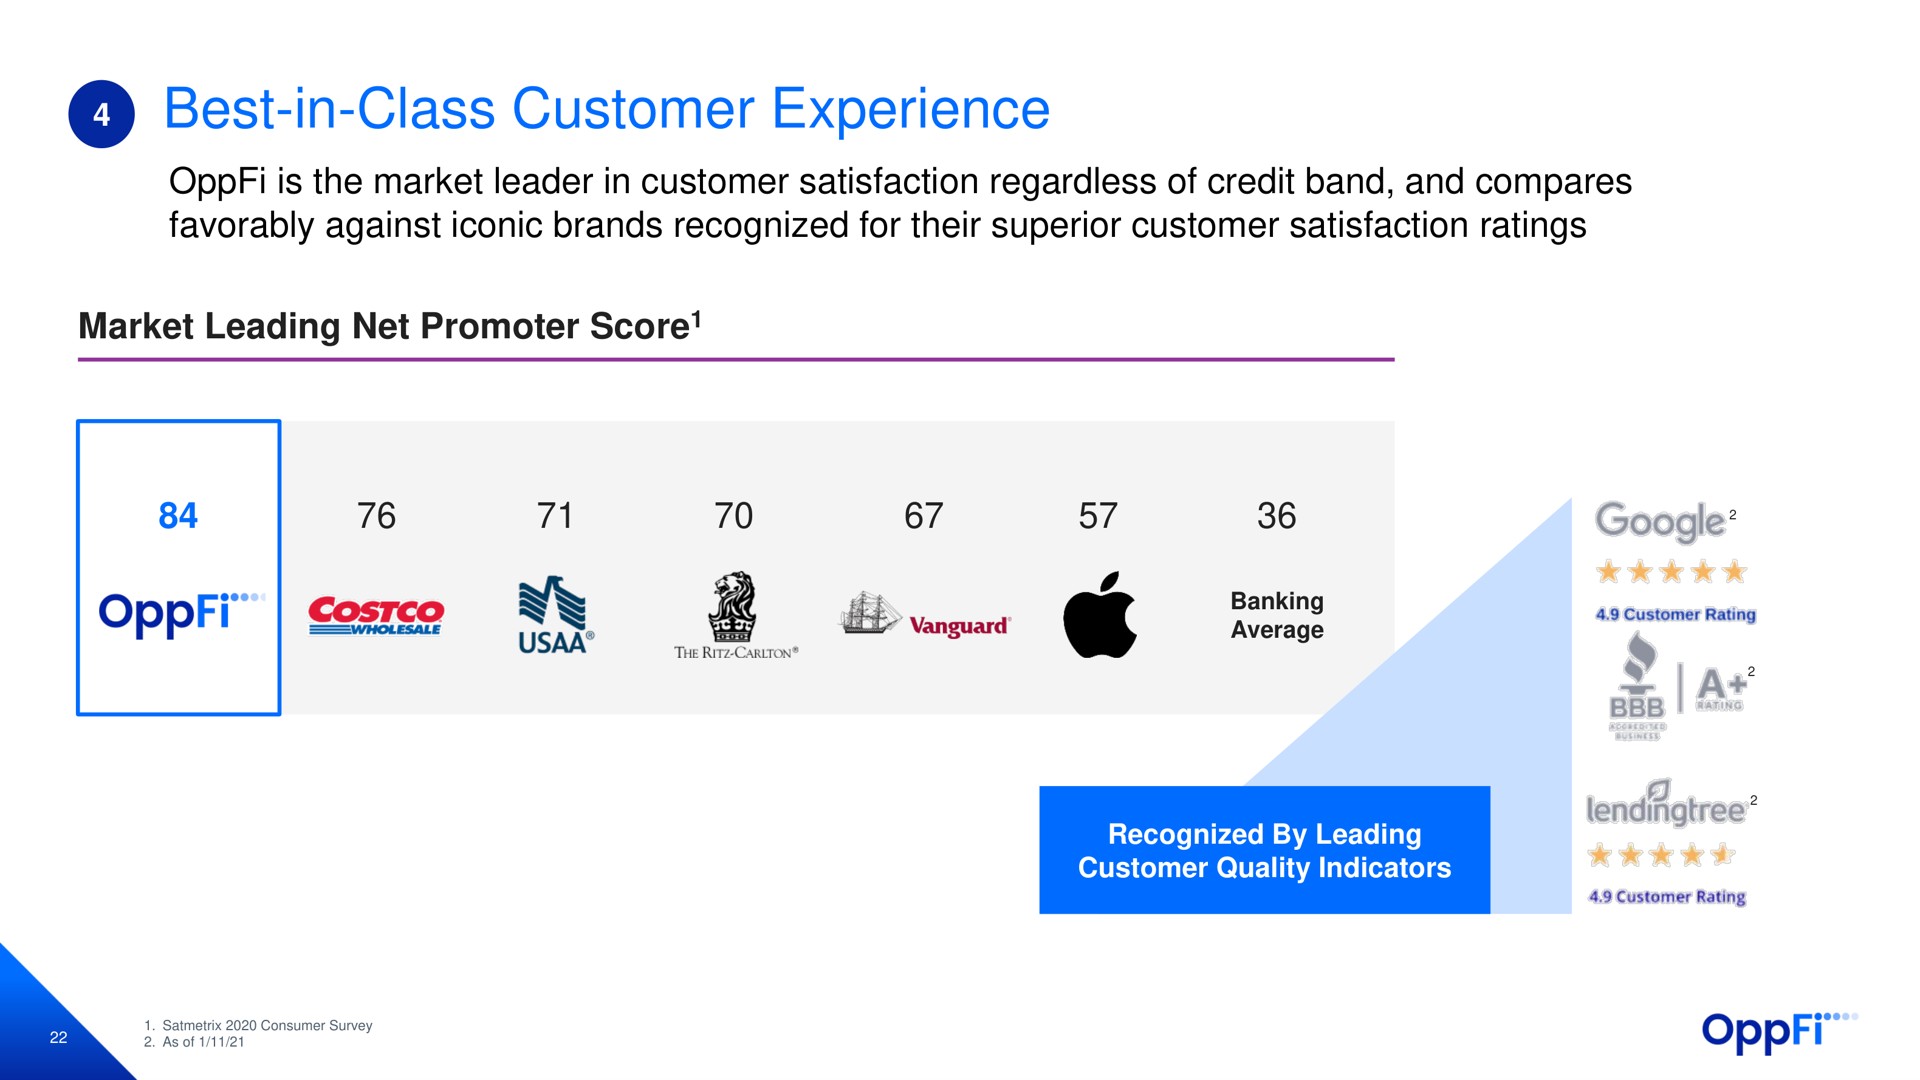 best in class customer experience is the market leader in customer satisfaction regardless of credit band and compares favorably against iconic brands recognized for their superior customer satisfaction ratings market leading net promoter score recognized by leading customer quality indicators | OppFi